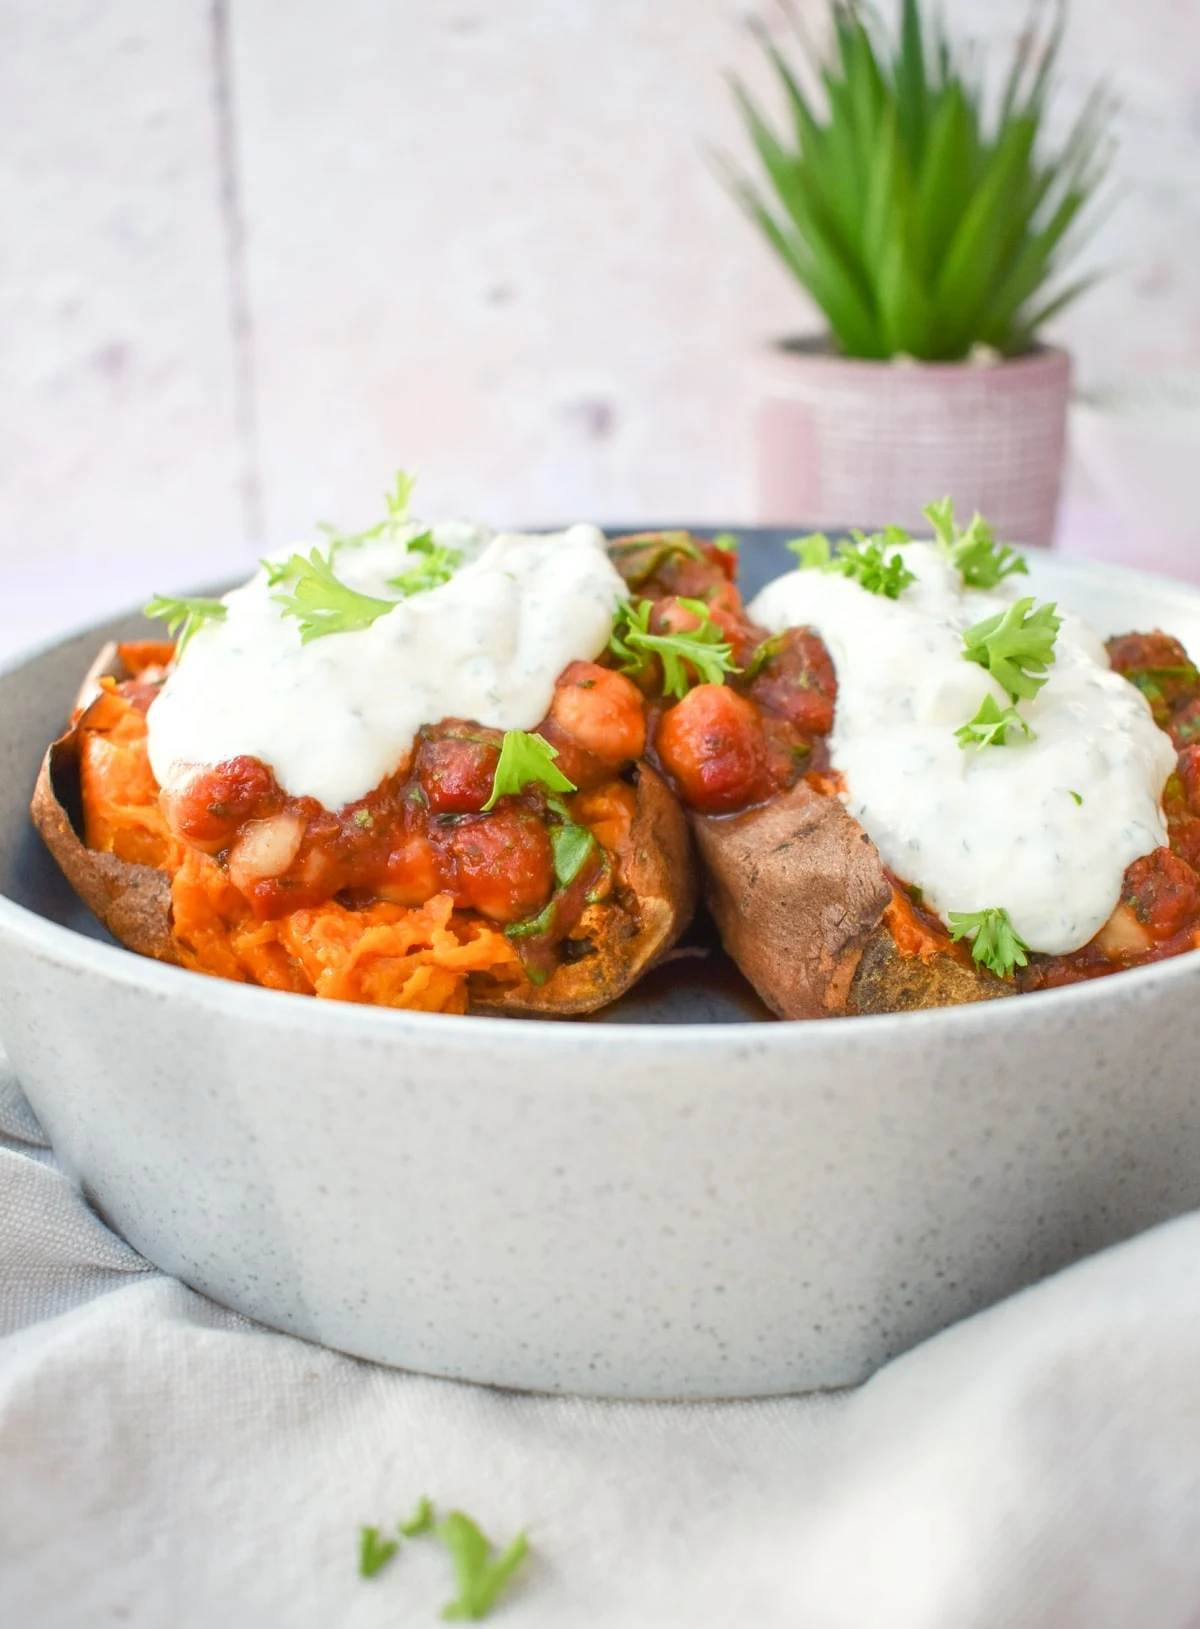 baked sweet potatoes in a bowl topped with chickpeas and a yoghurt topping